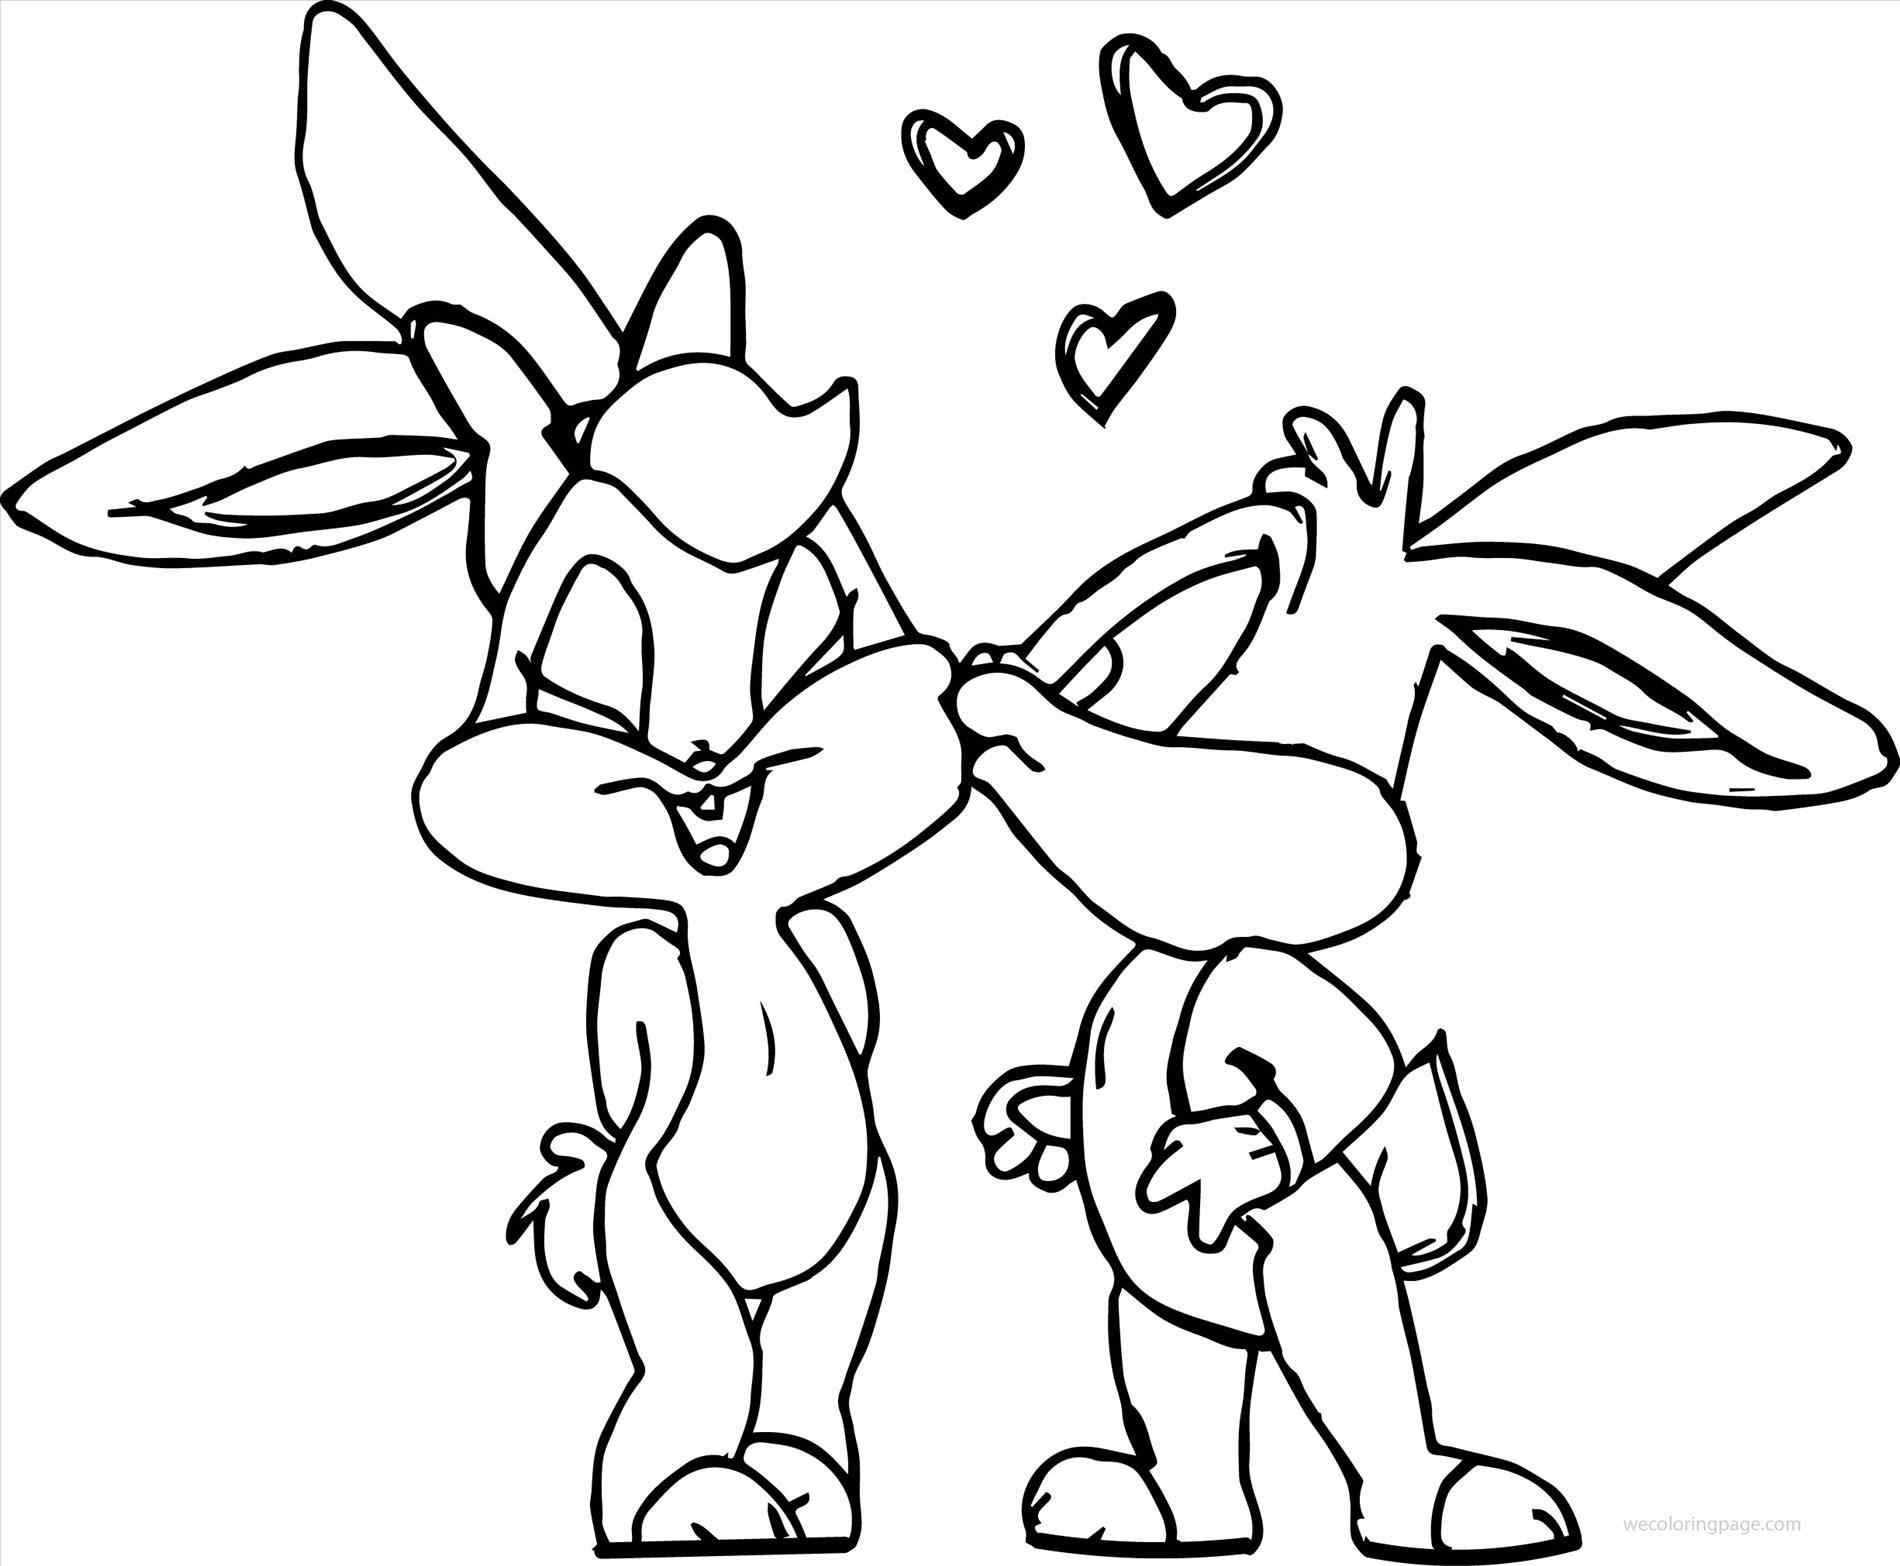 Sonic Kissing Amy Coloring Pages Coloring Pages 34028 The Best Porn